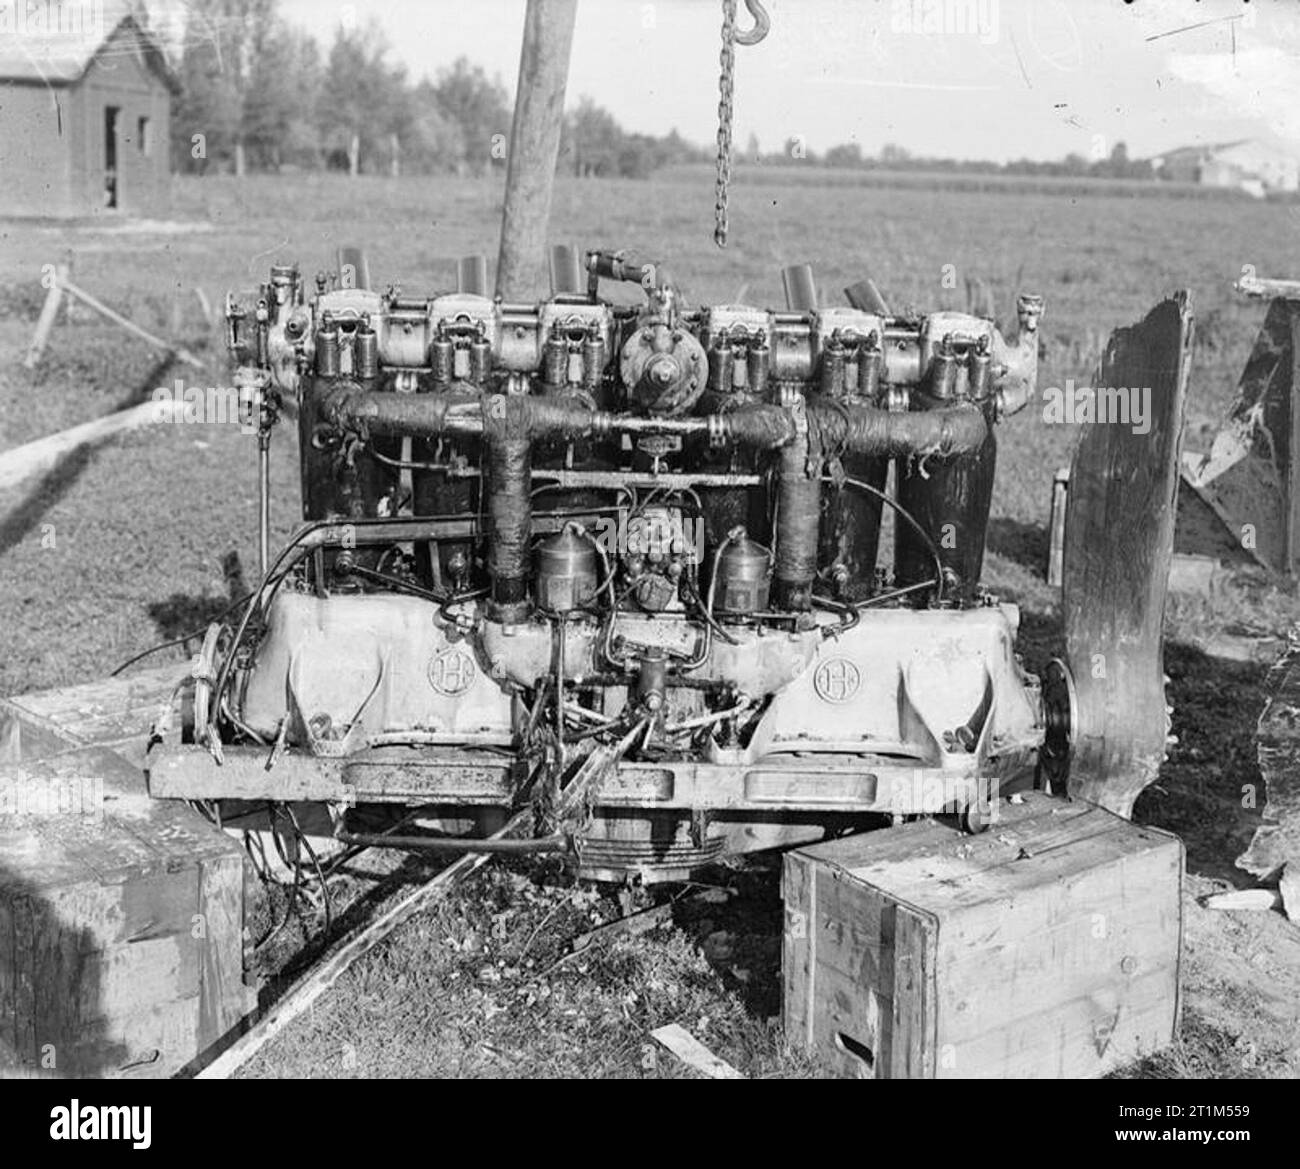 Ministry of Information First World War Official Collection Inlet side of a 240 h. p. Hiero engine of a PHOENIX biplane brought down on British aerodrome. Stock Photo